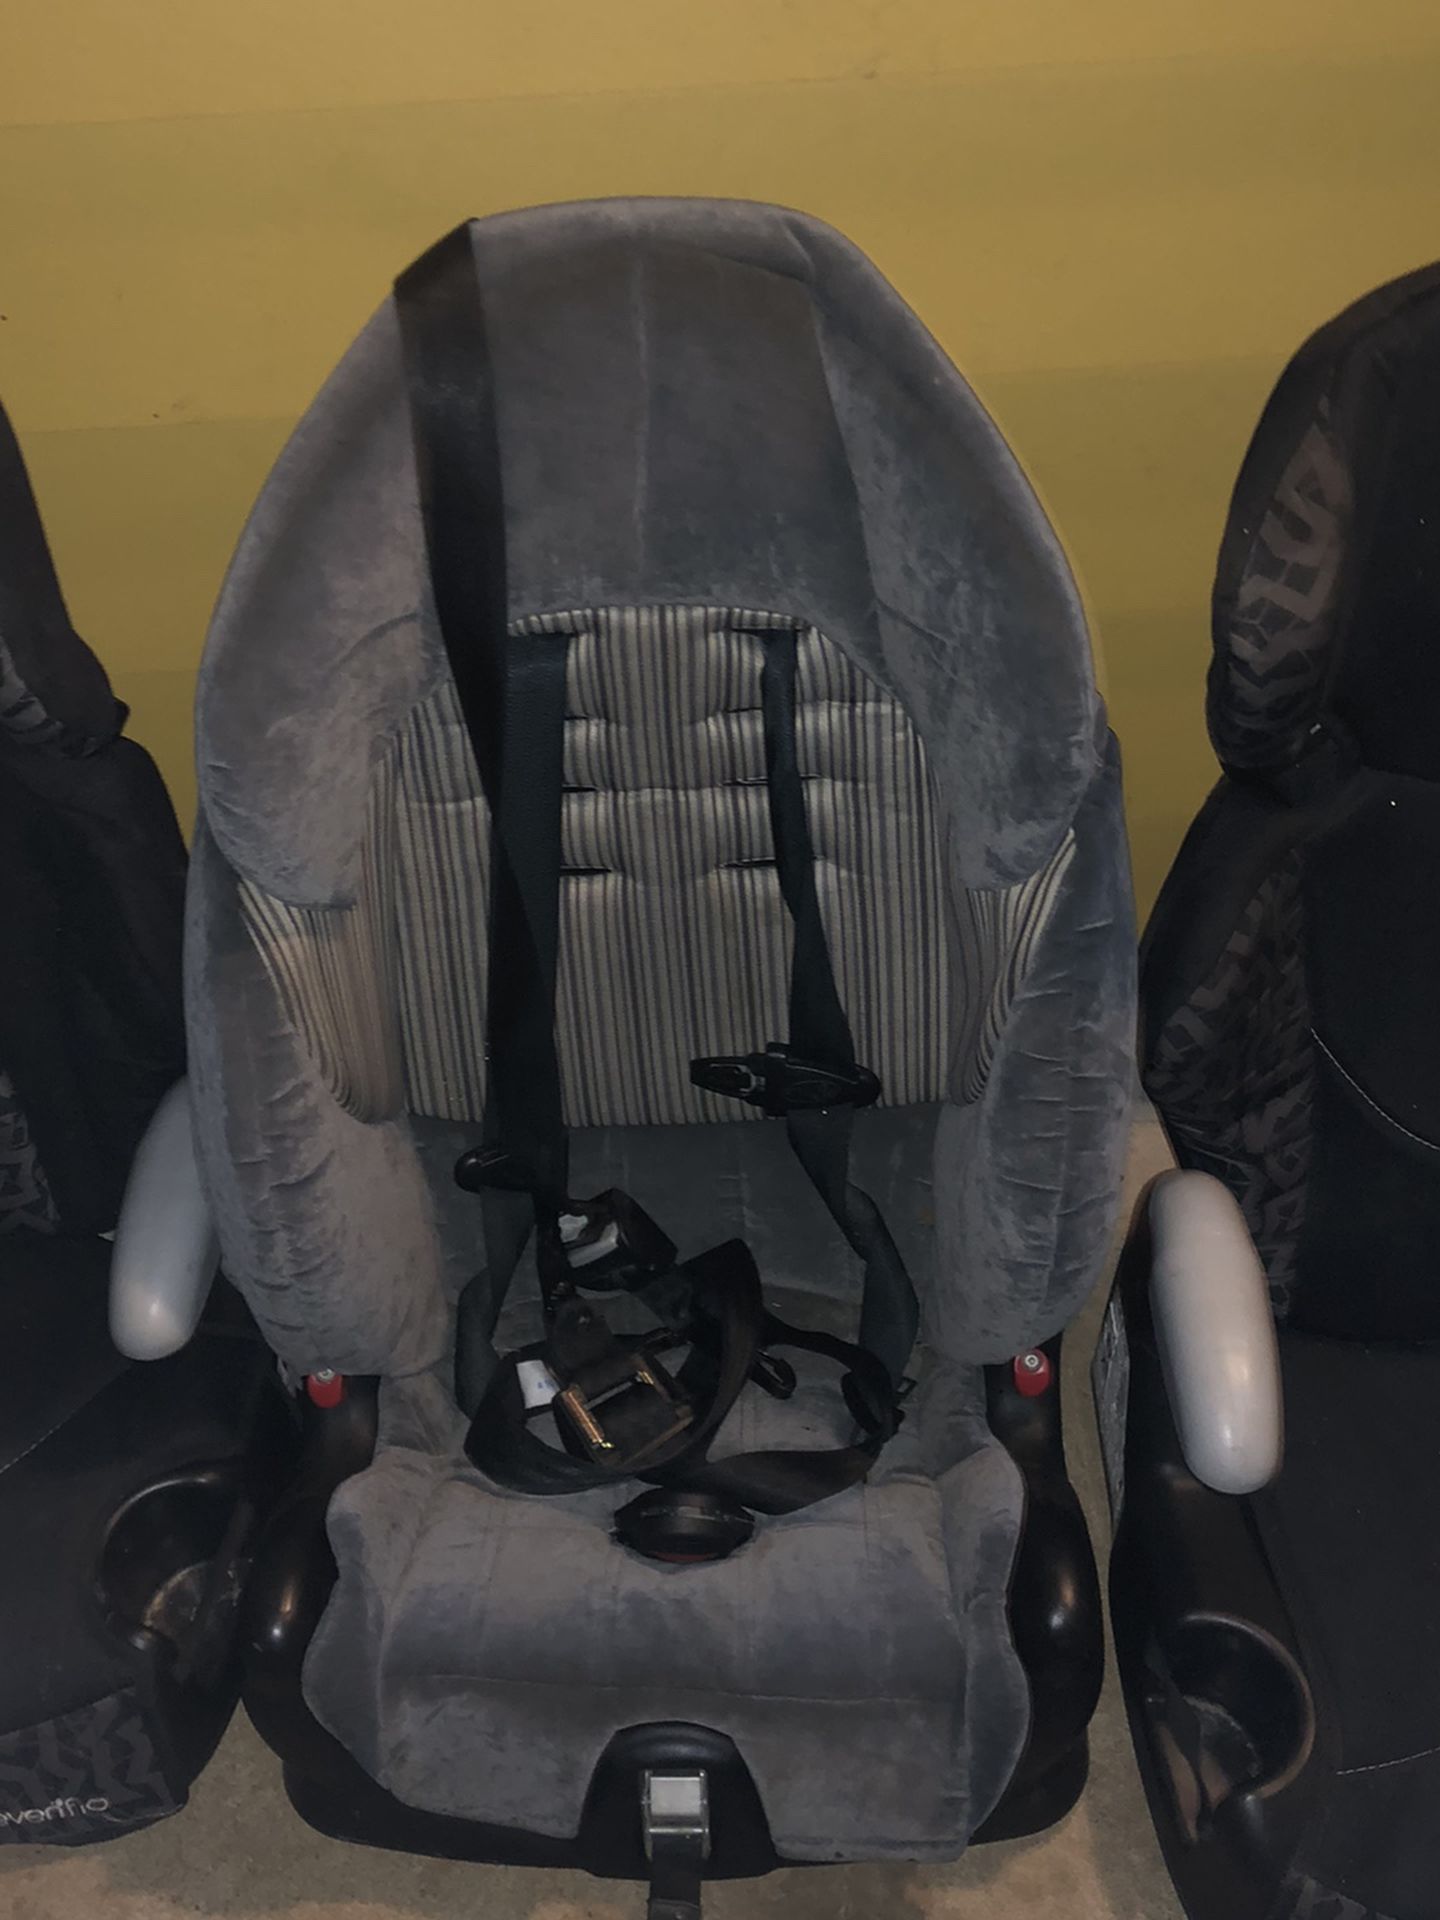 Booster Seats For Kids And Baby